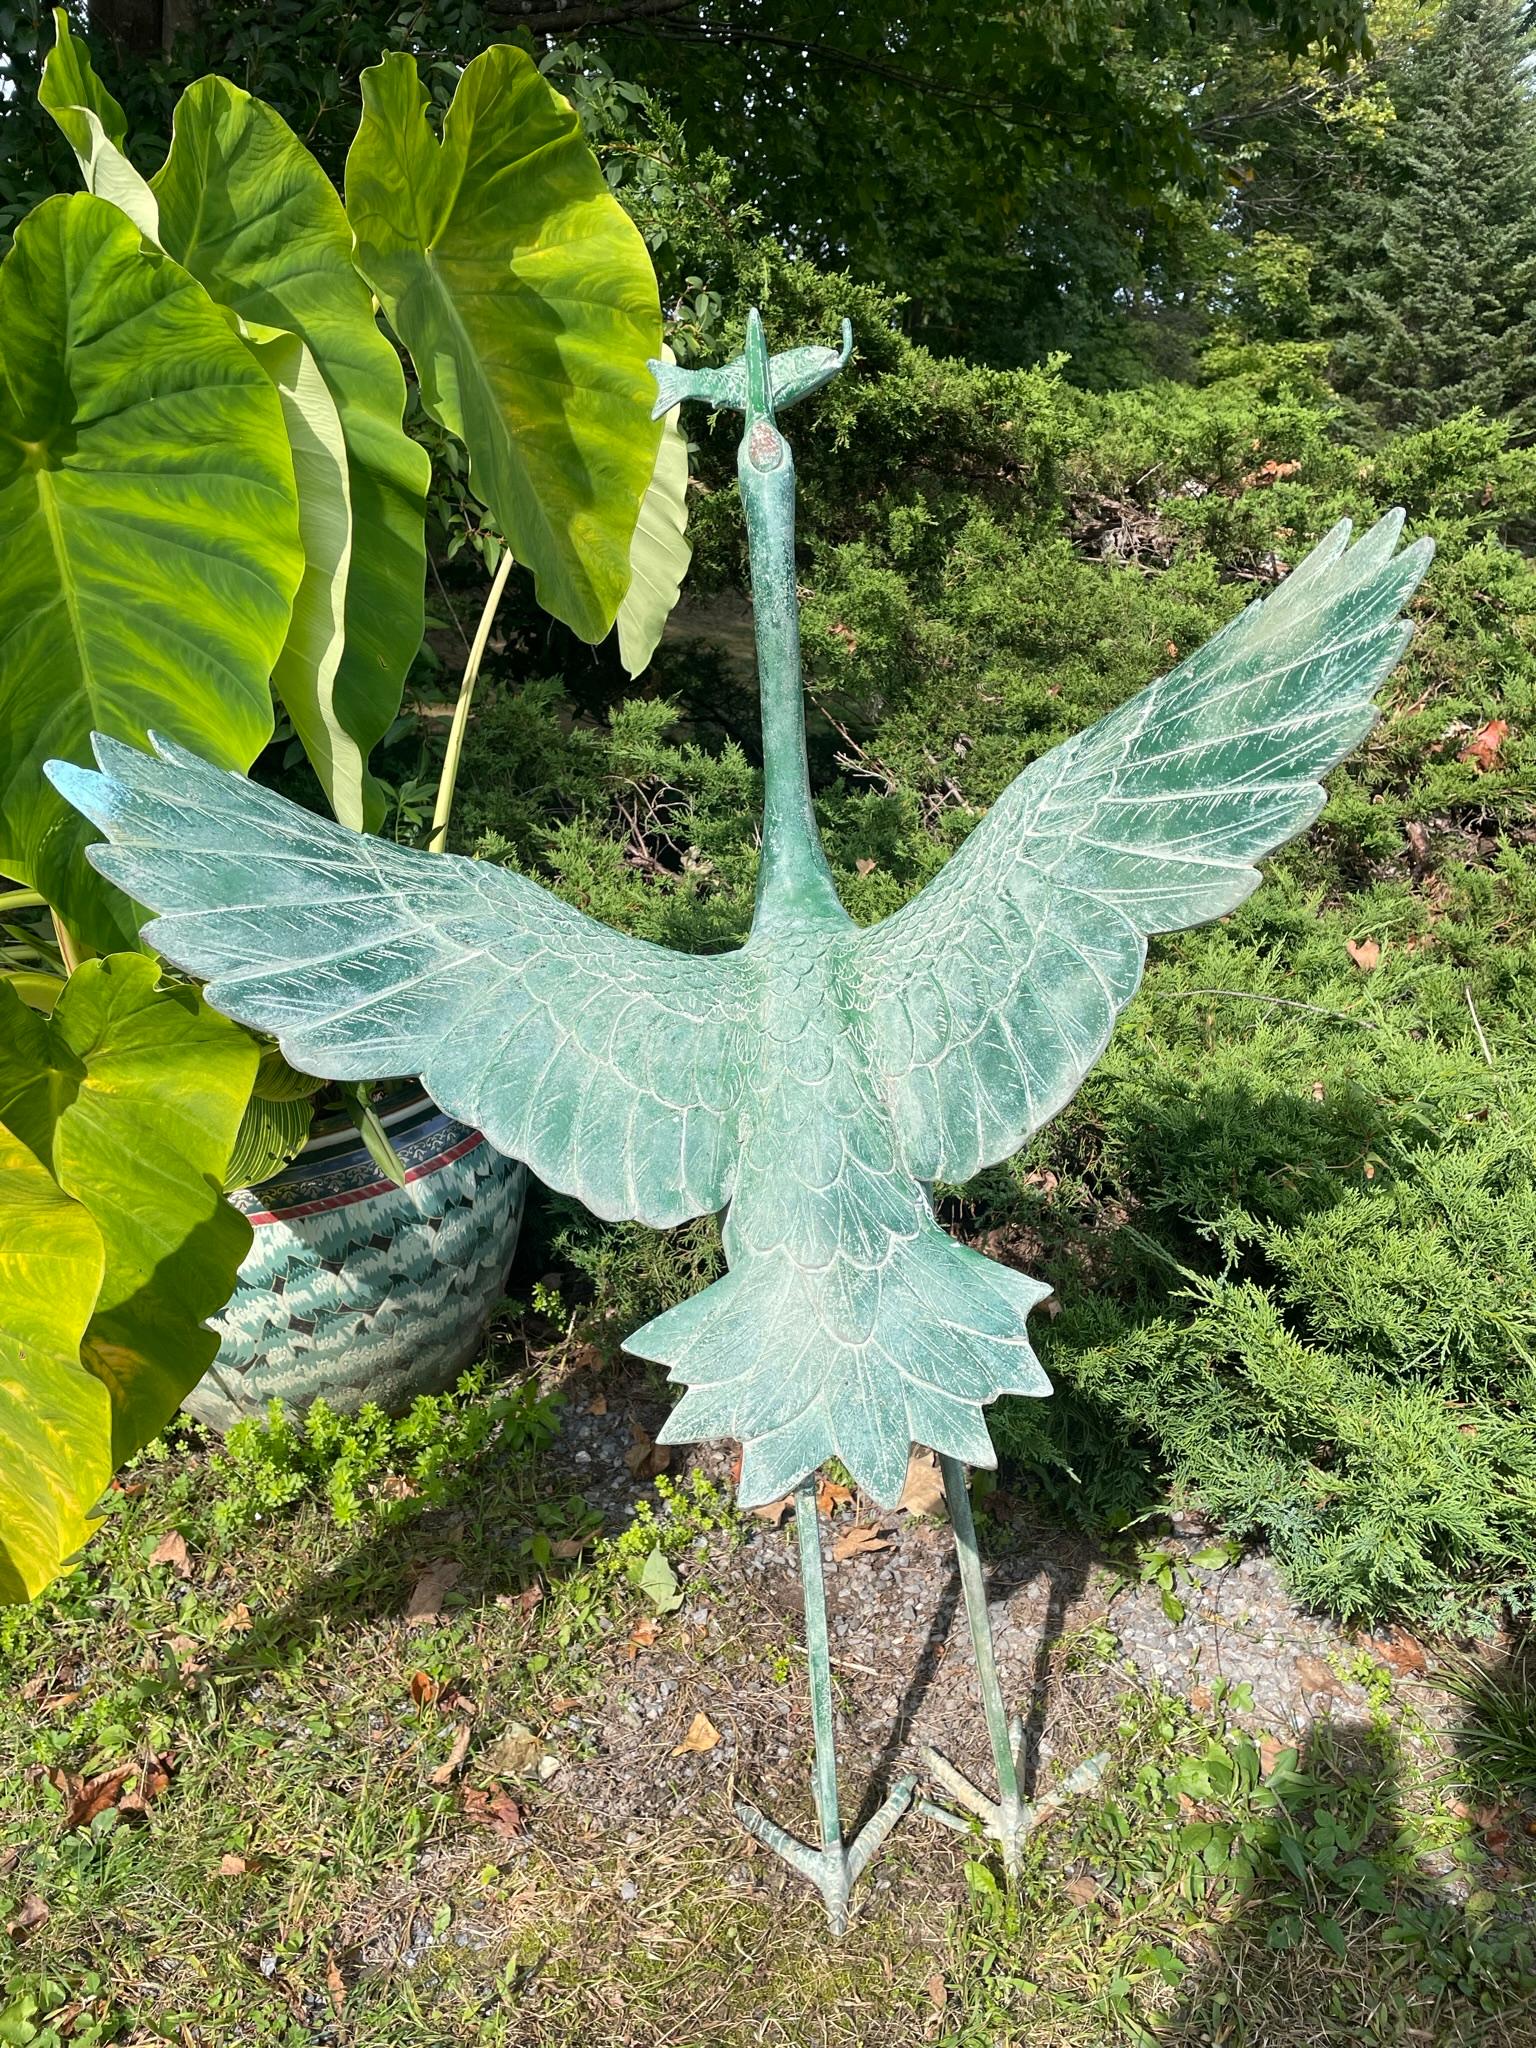 Just received from our last shipment from Japan- the first we've seen 

Japan, a fine tall large scale red crested bronze garden crane purposely crafted as a garden fountain with a water spout and serving as an attractive garden center piece.  It